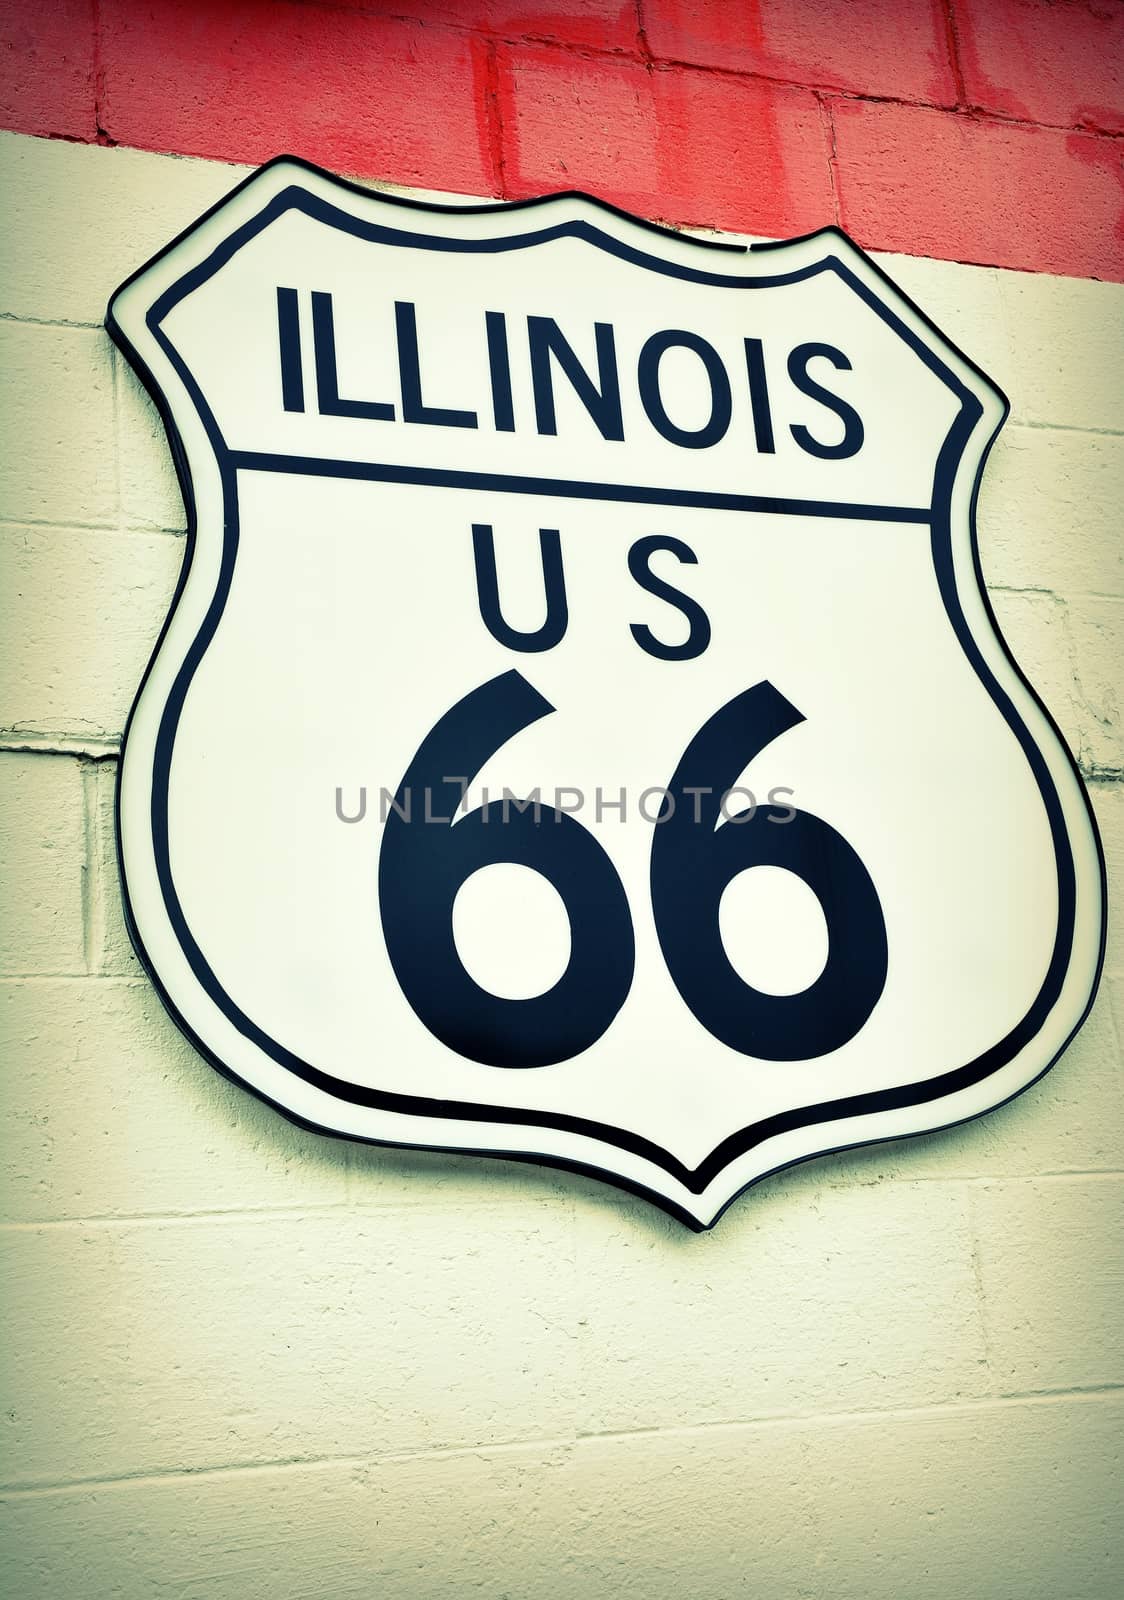 Historic Route 66 road sign. by CreativePhotoSpain